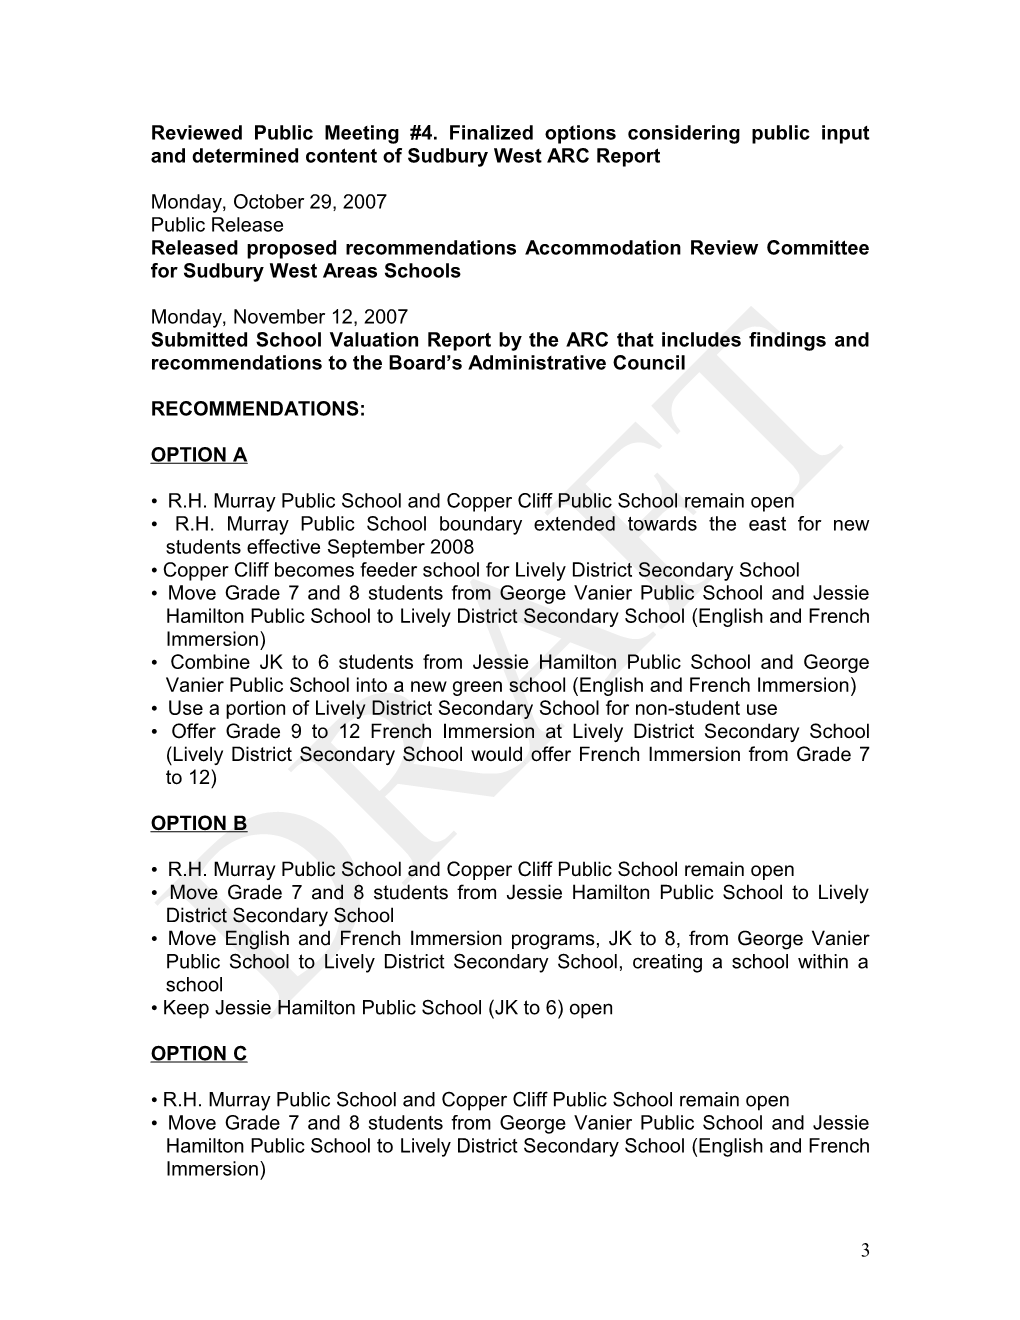 Sudbury West Accommodation Review Committee Report